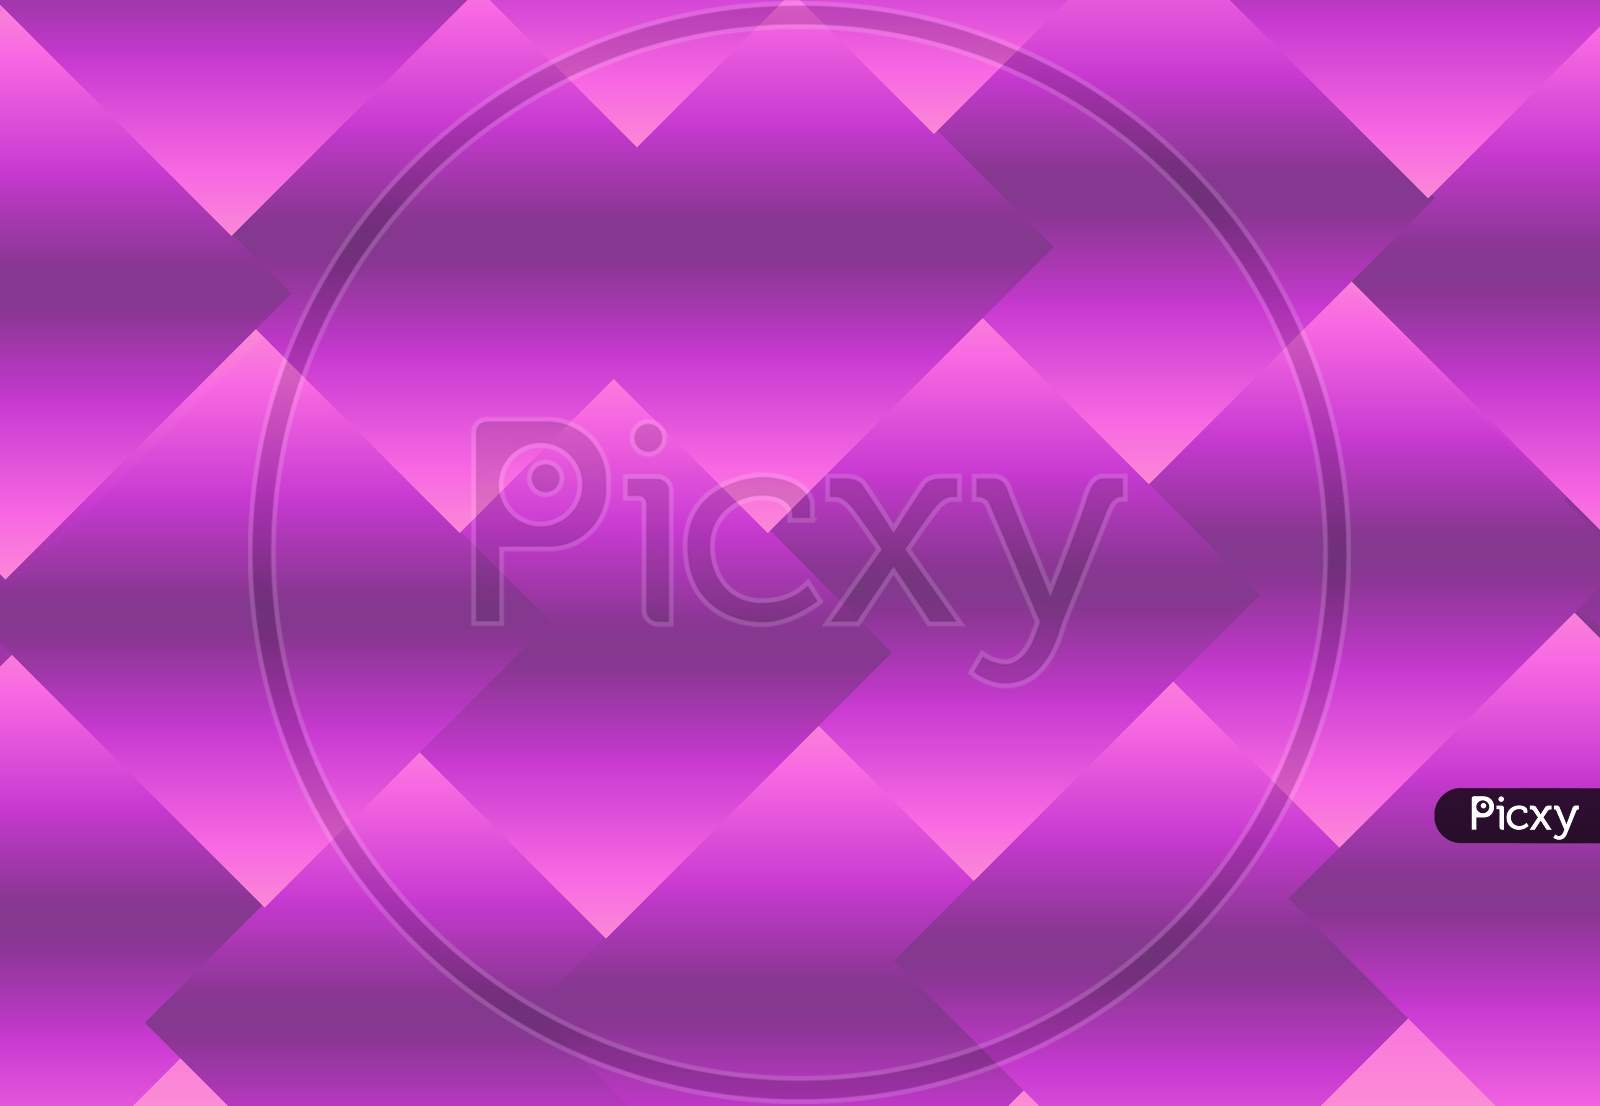 Abstract 3d floating rhombus pattern. 3d illustration pink purple gradient background. Seamless modern texture For advertisement, wall texture, presentation, fabric, floor, party tile, print, wrapper.